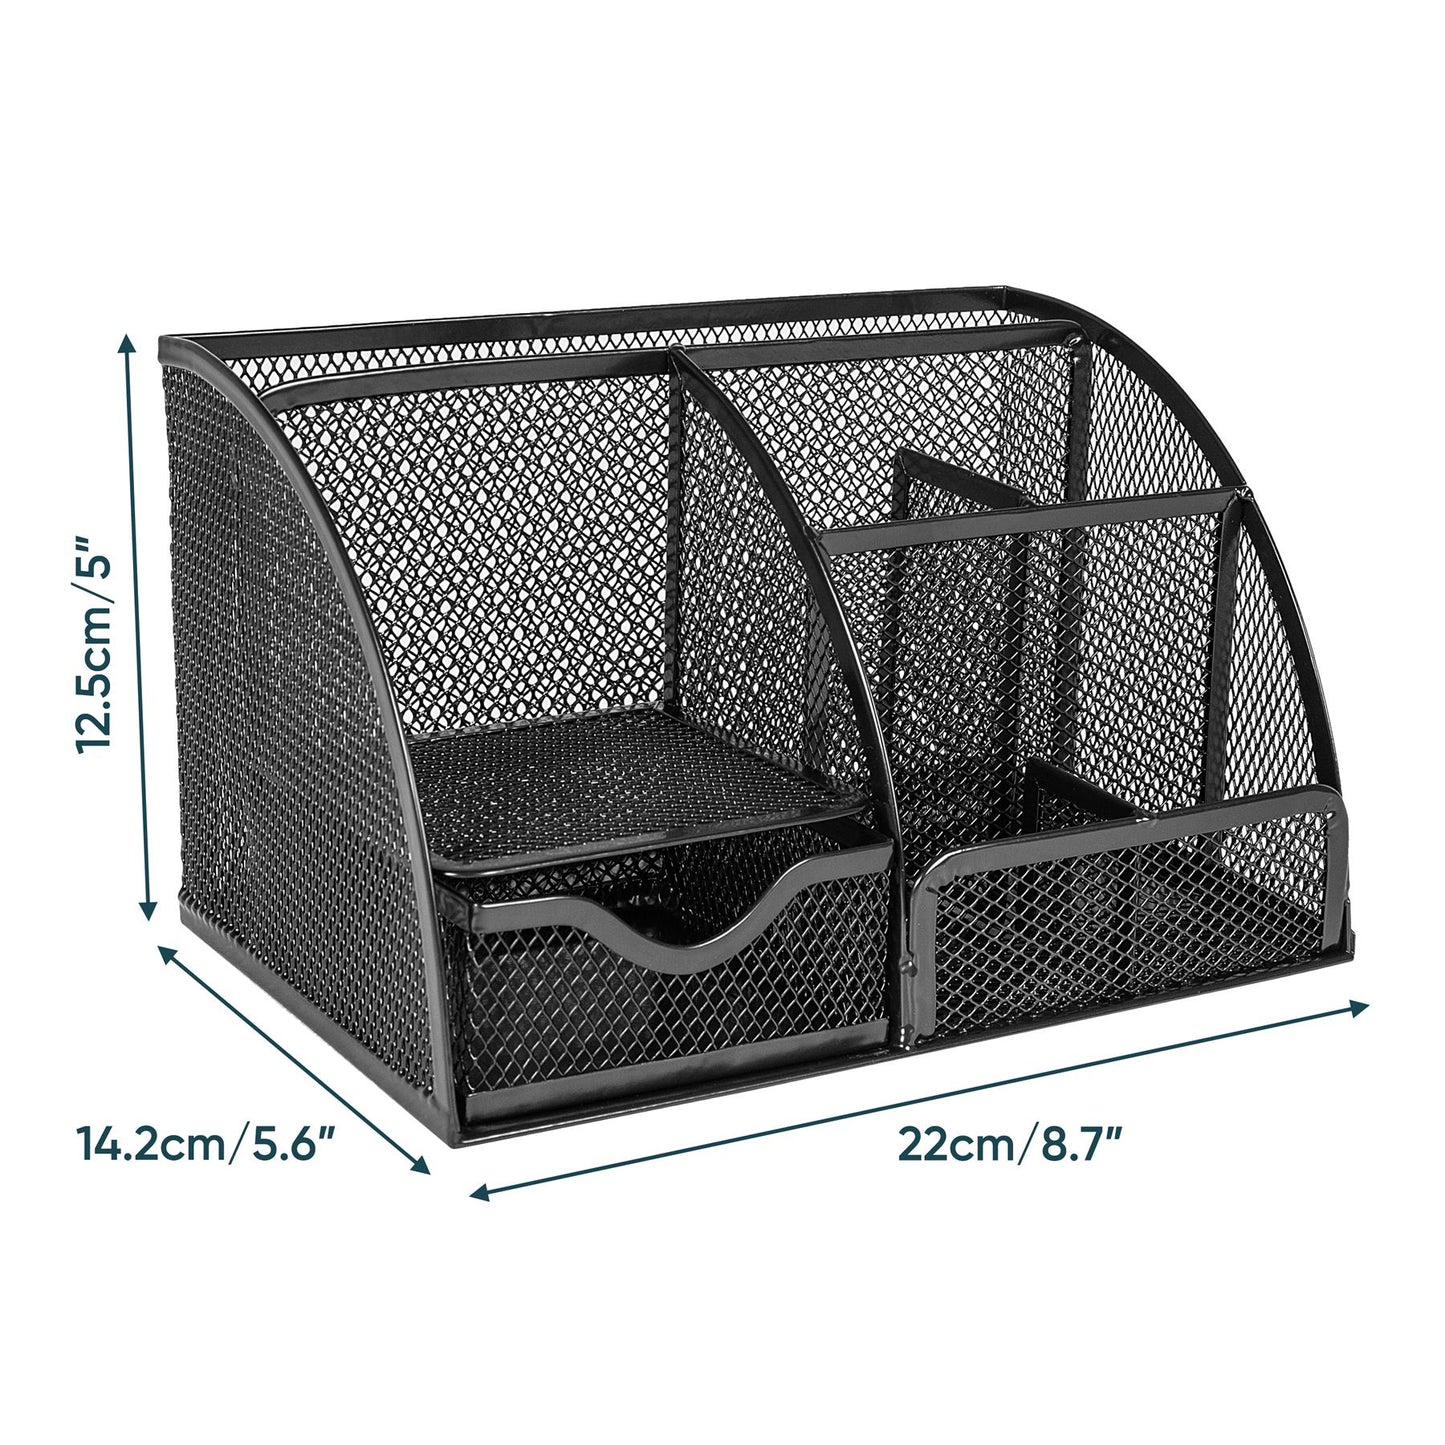 Mesh Desk Organizer For Office Stationery And Supplies